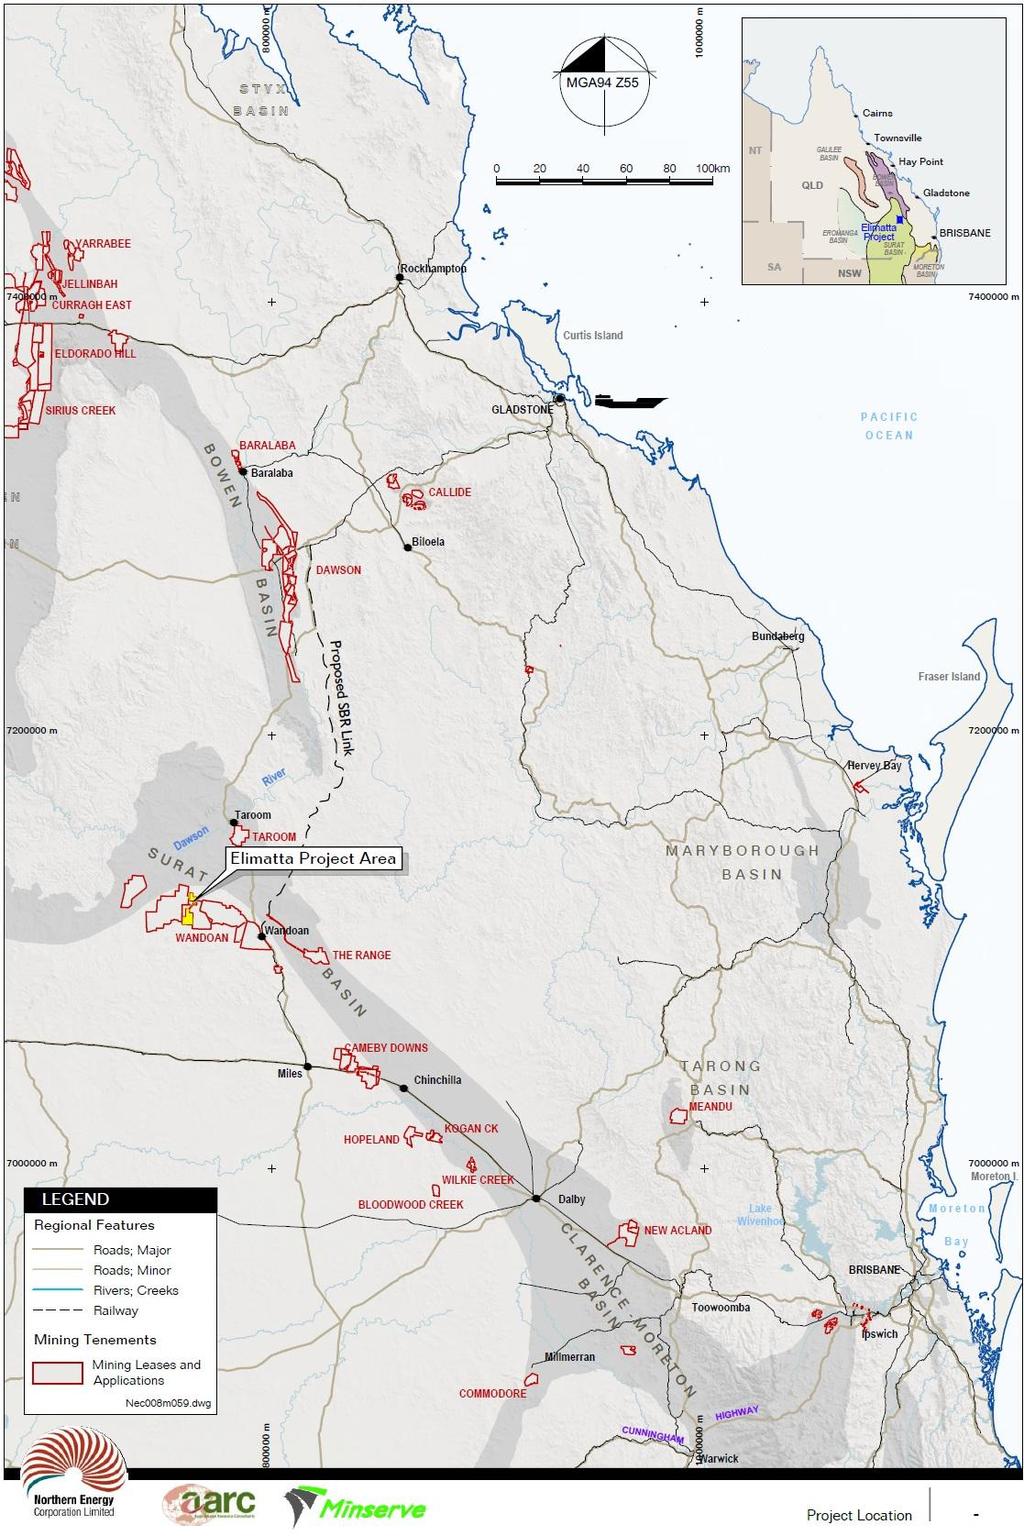 The Project is located in the Western Downs Regional Council area in southern inland Queensland, approximately 35 km west of Wandoan and 380 km north-west of Brisbane.